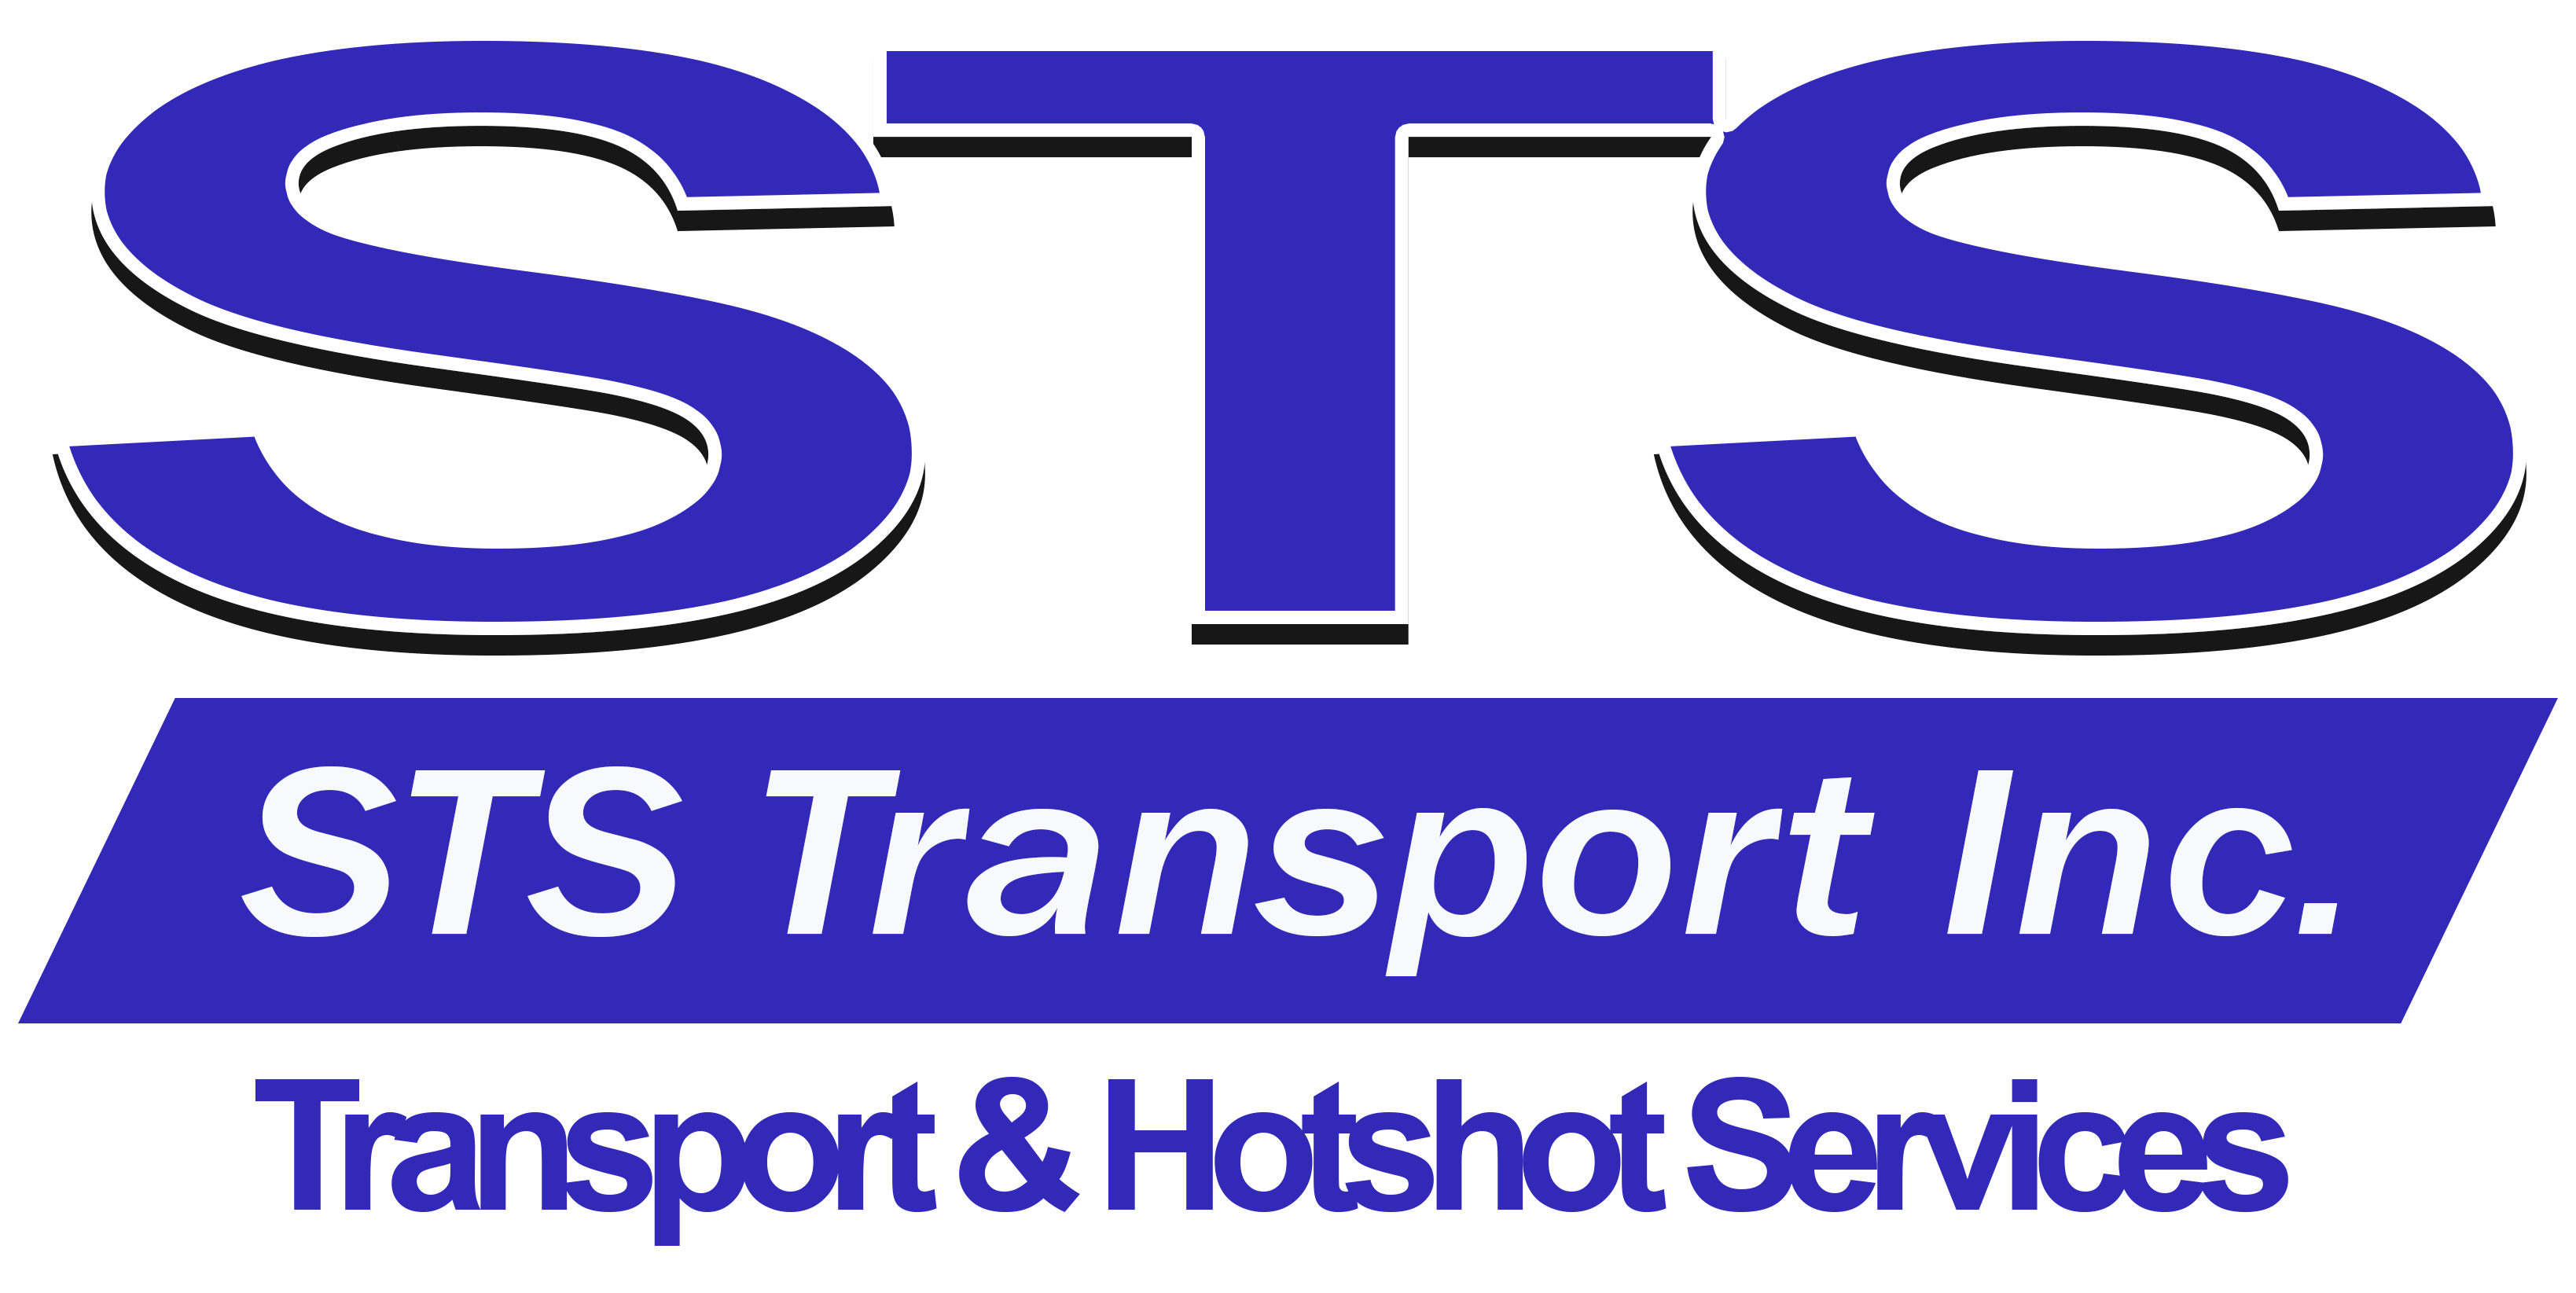 STS Transport Inc. | Regular Transport and Hotshot Services | Express Delivery | Trucking | Shipping | Courier | Edmonton